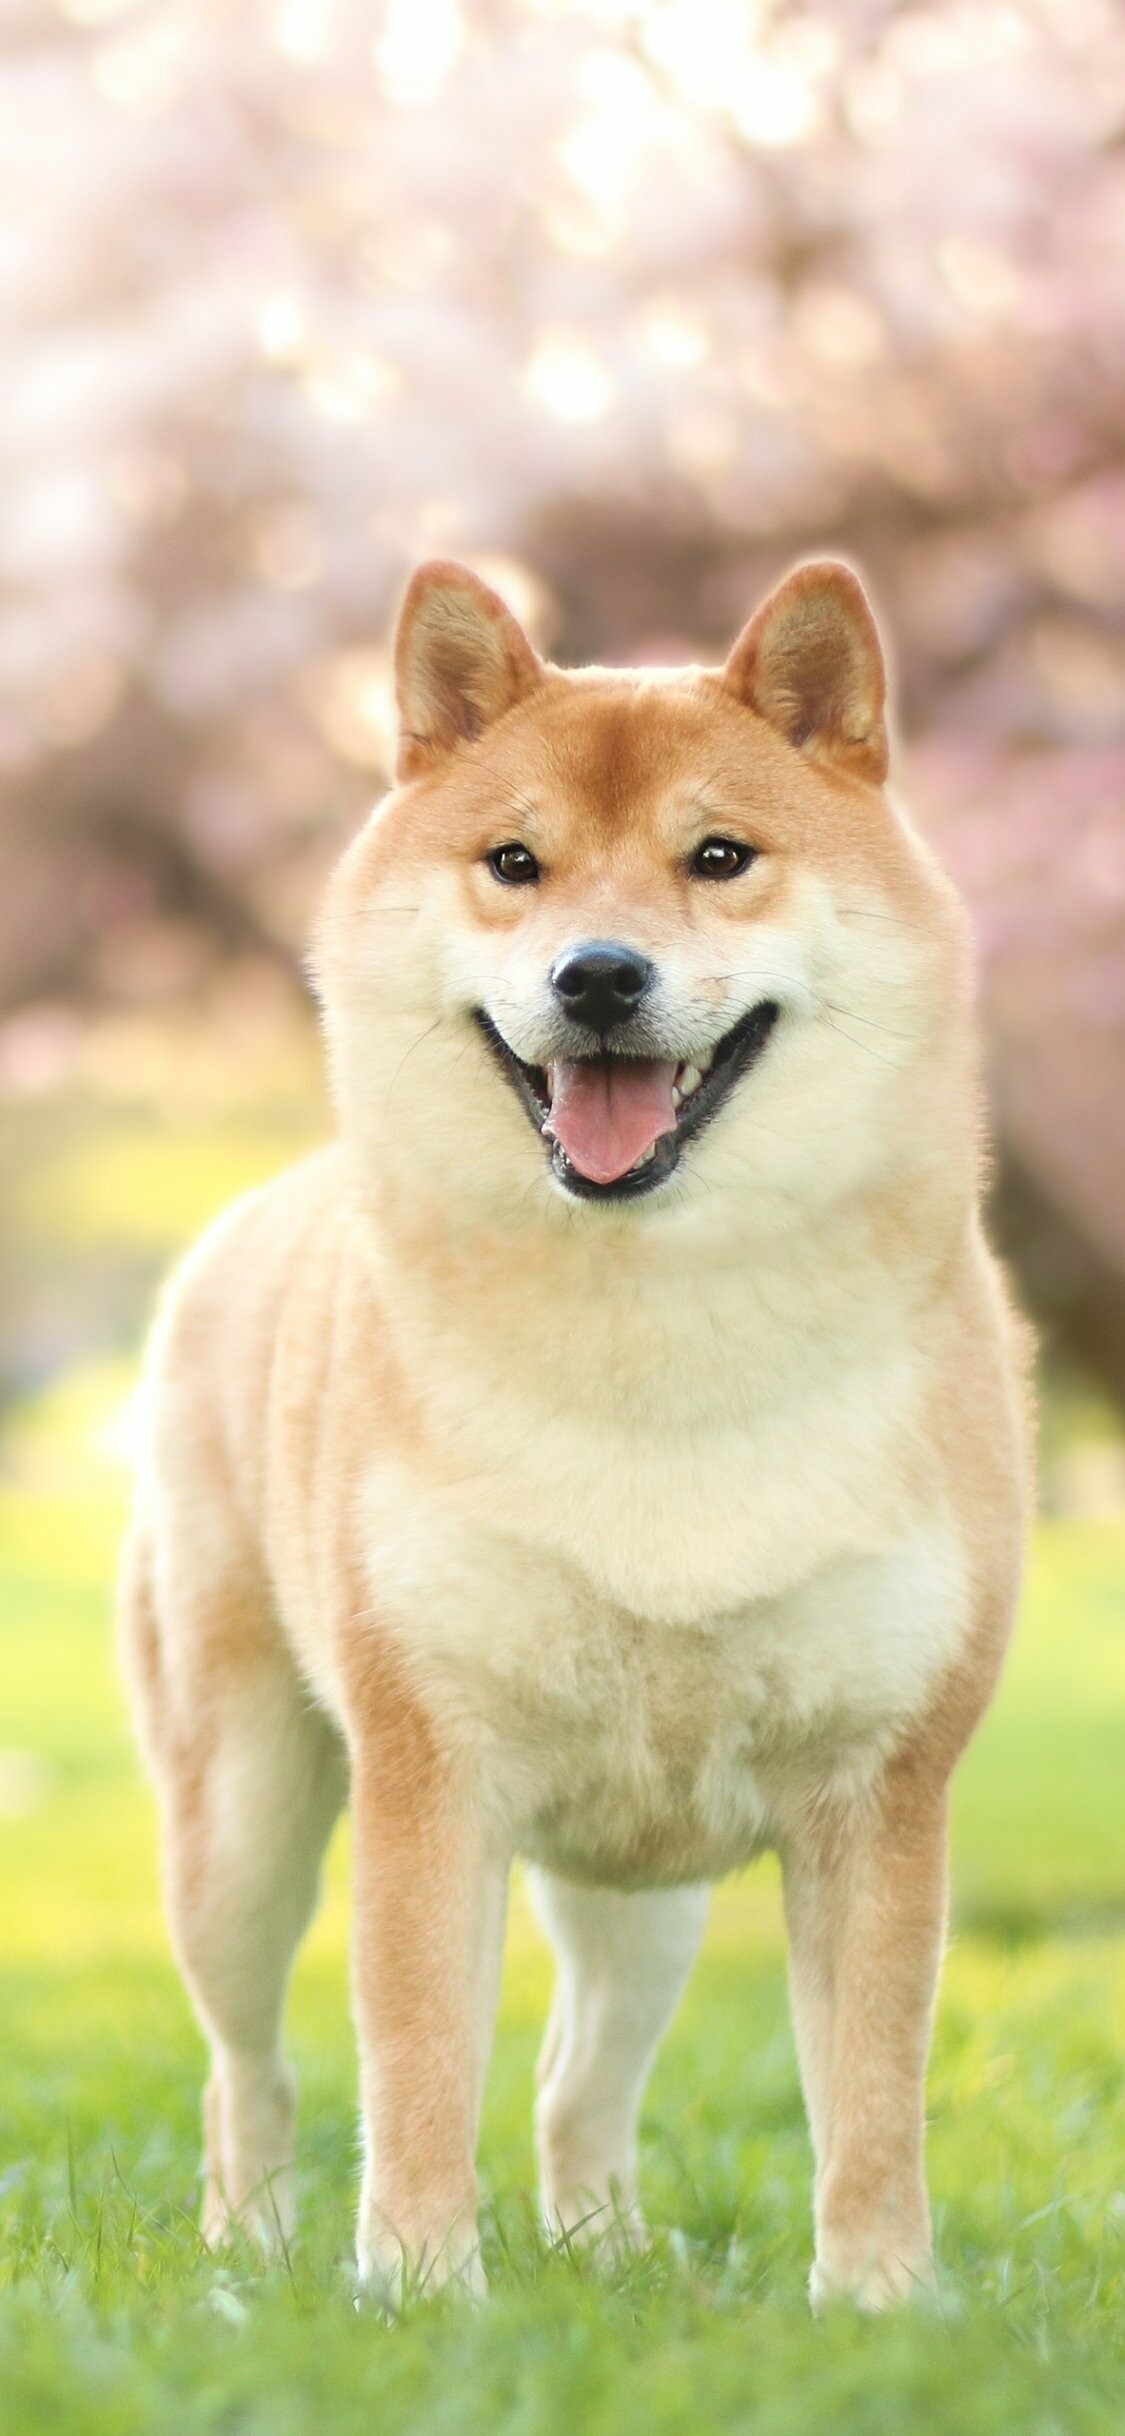 Shiba Inu: The breed was bred to hunt and flush small game, such as birds and rabbits. 1130x2440 HD Background.